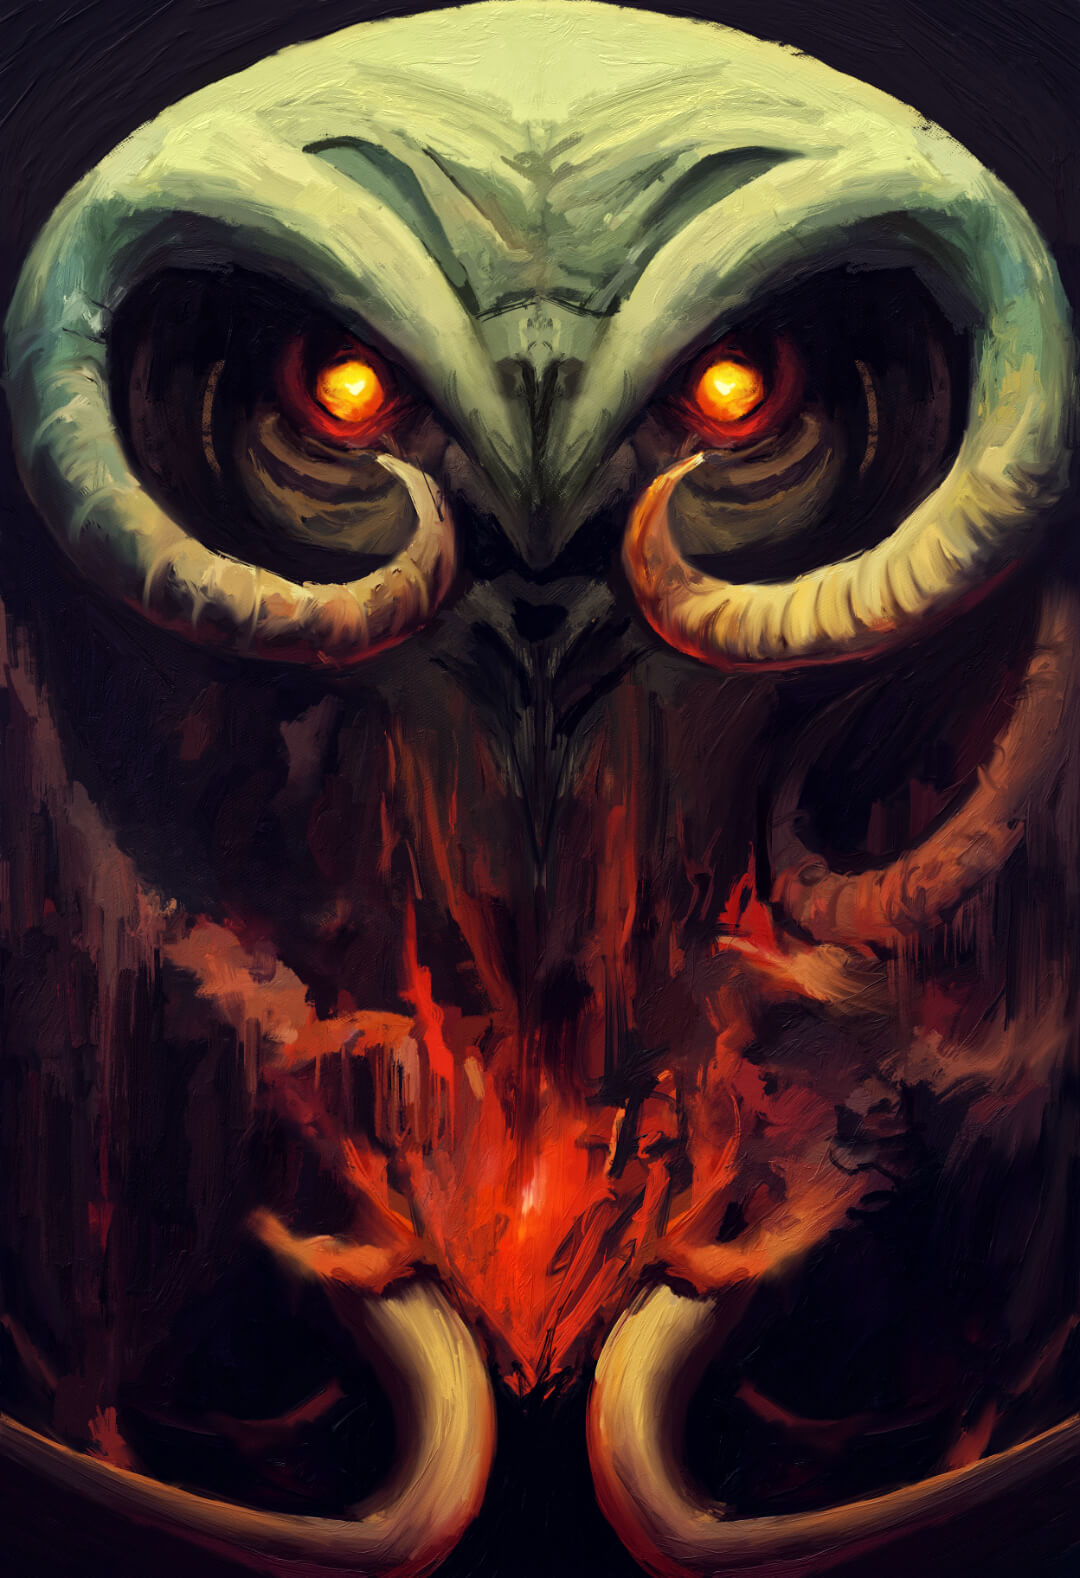 Portrait of a horned nightmare creature with glowing yellow eyes.